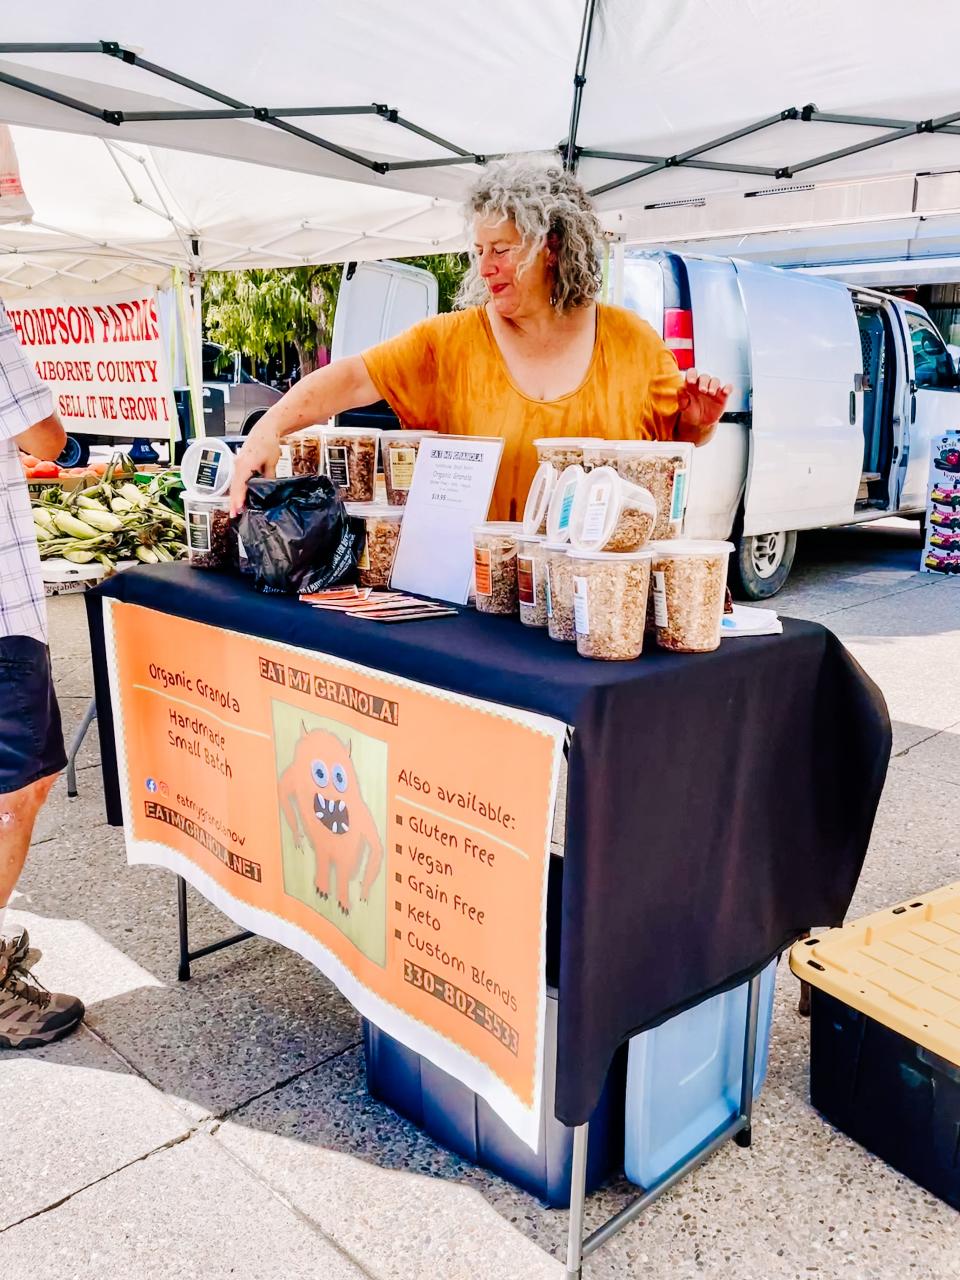 Debbie Meritsky, co-founder of Eat My Granola hands a customer a container of her Krak granola at Market Square, Knoxville on Aug. 31, 2022.